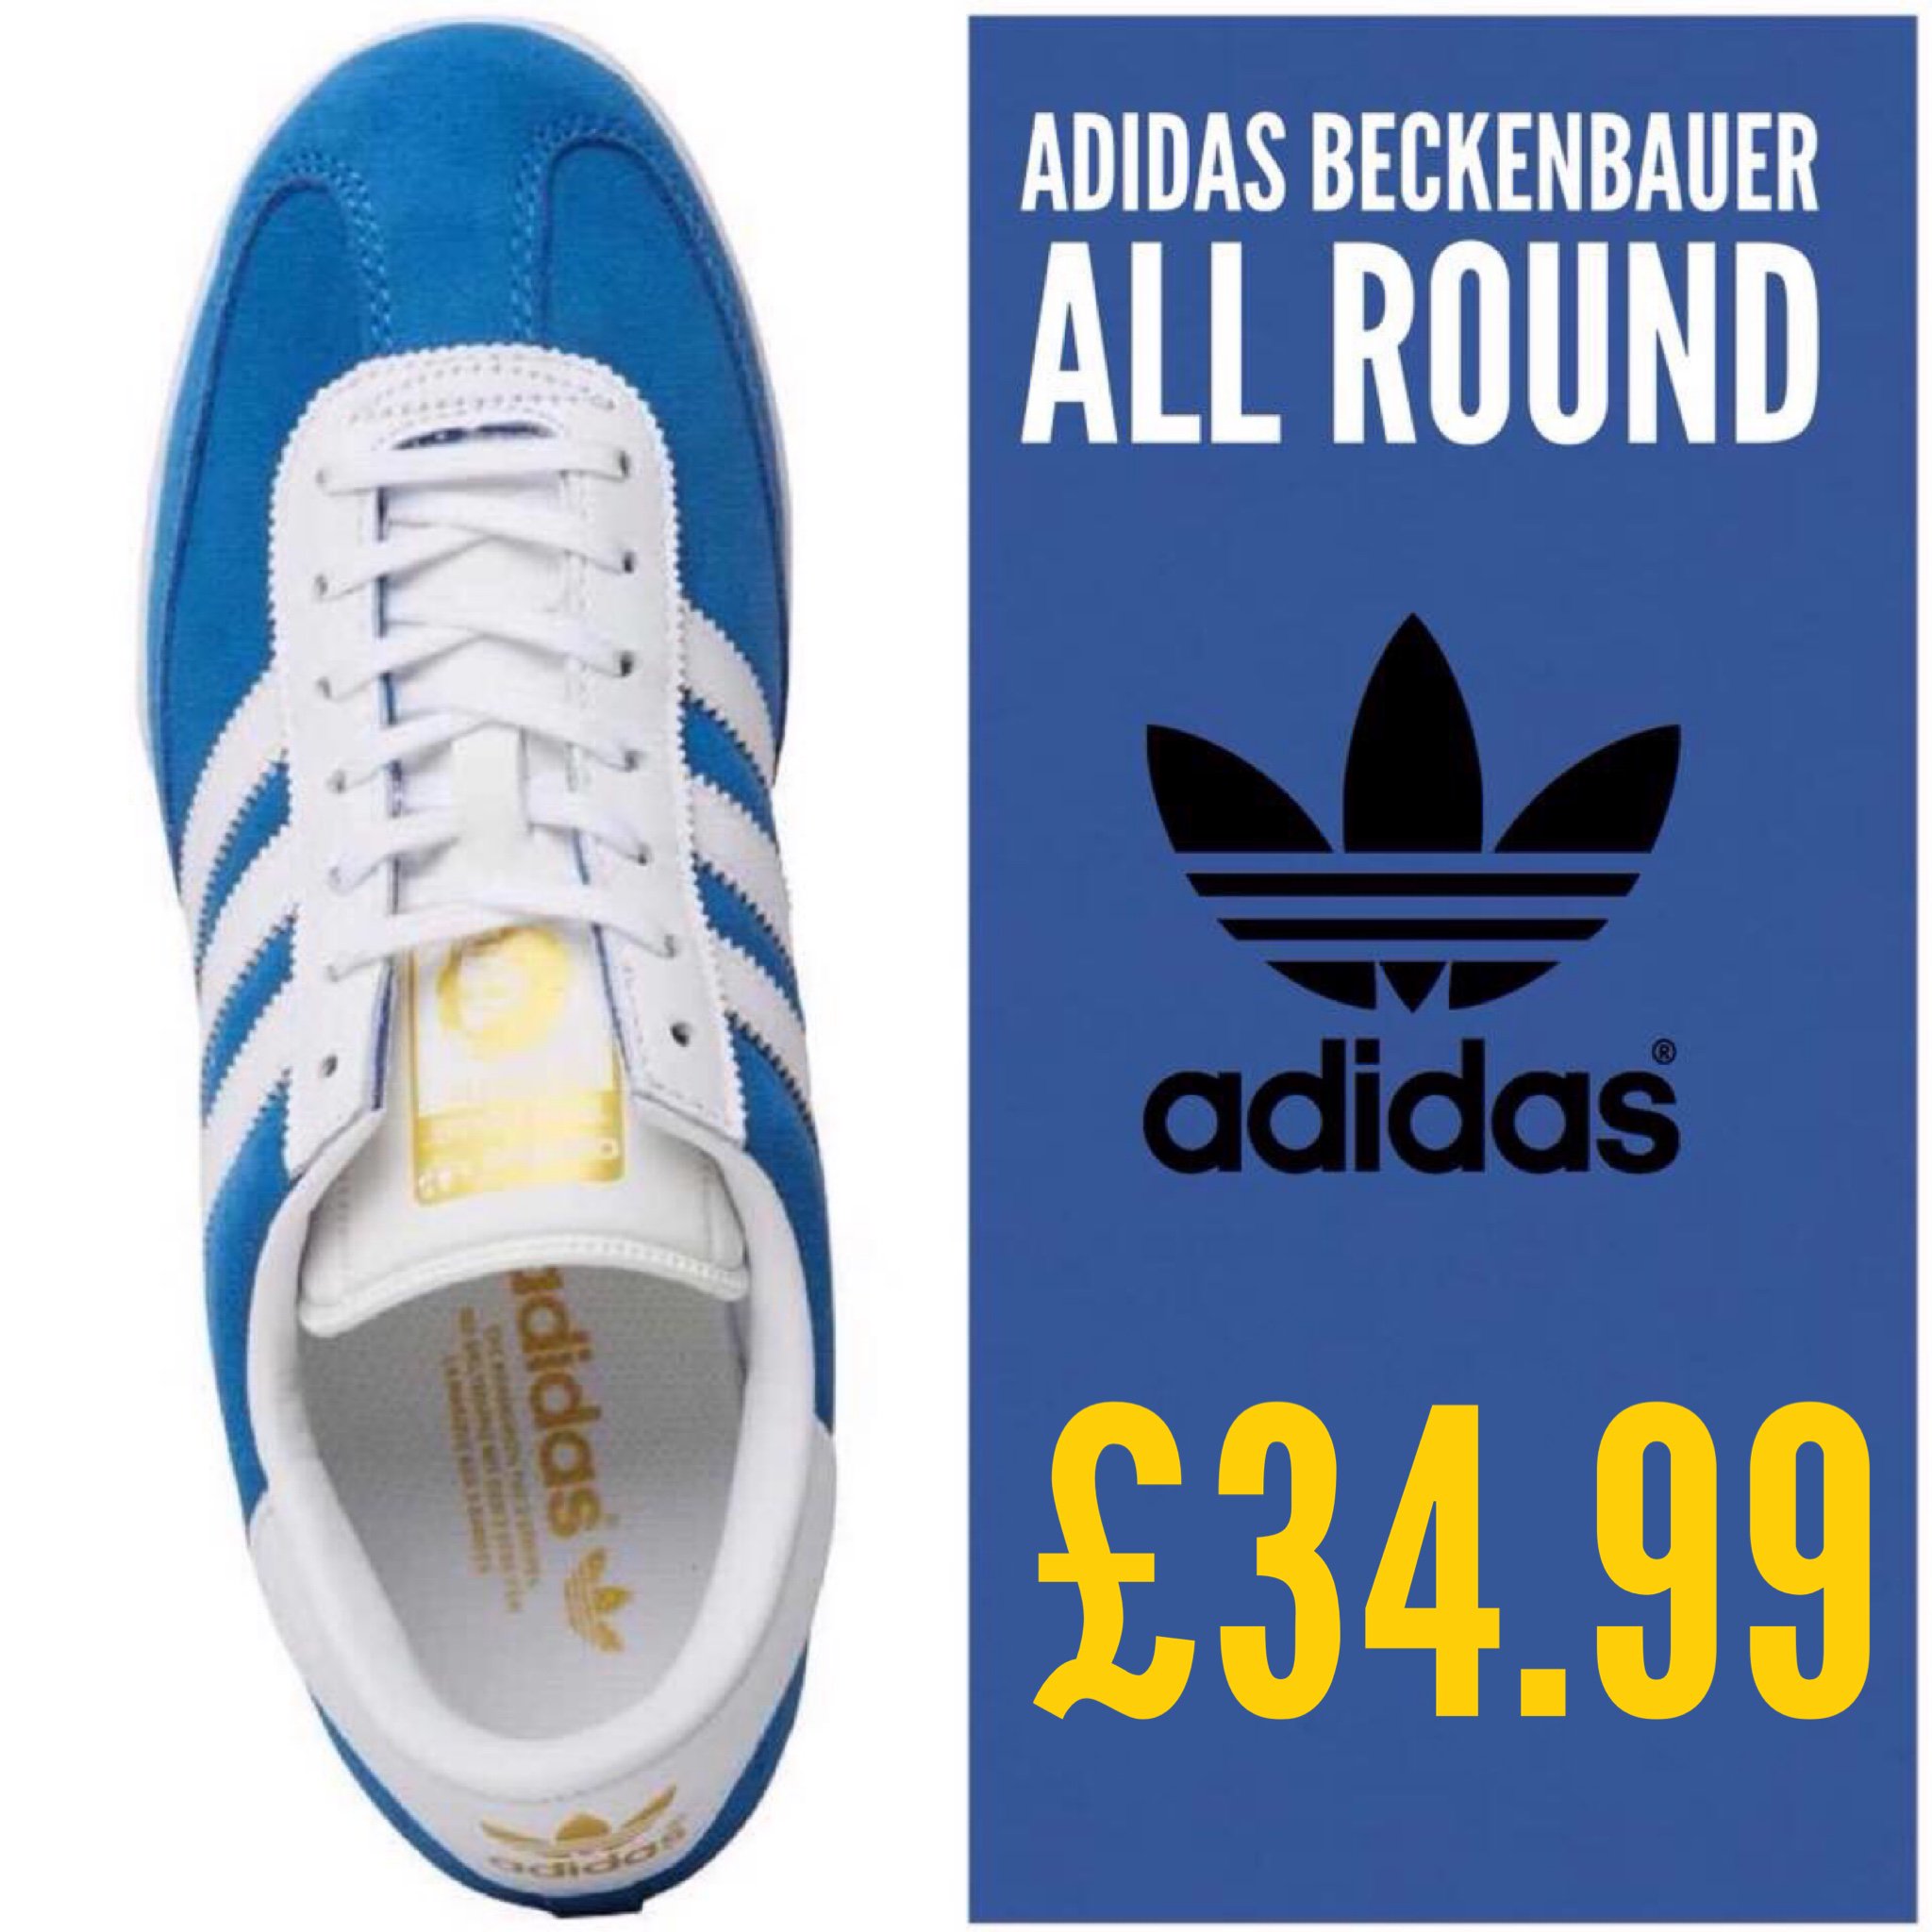 The Casuals Directory on Twitter: "Adidas Beckenbauer All Round Available  here: https://t.co/SaZRBE20AR Price: £34.99 #adidas #adidasbeckenbauer  #sale https://t.co/LTEXwH1r9b" / Twitter